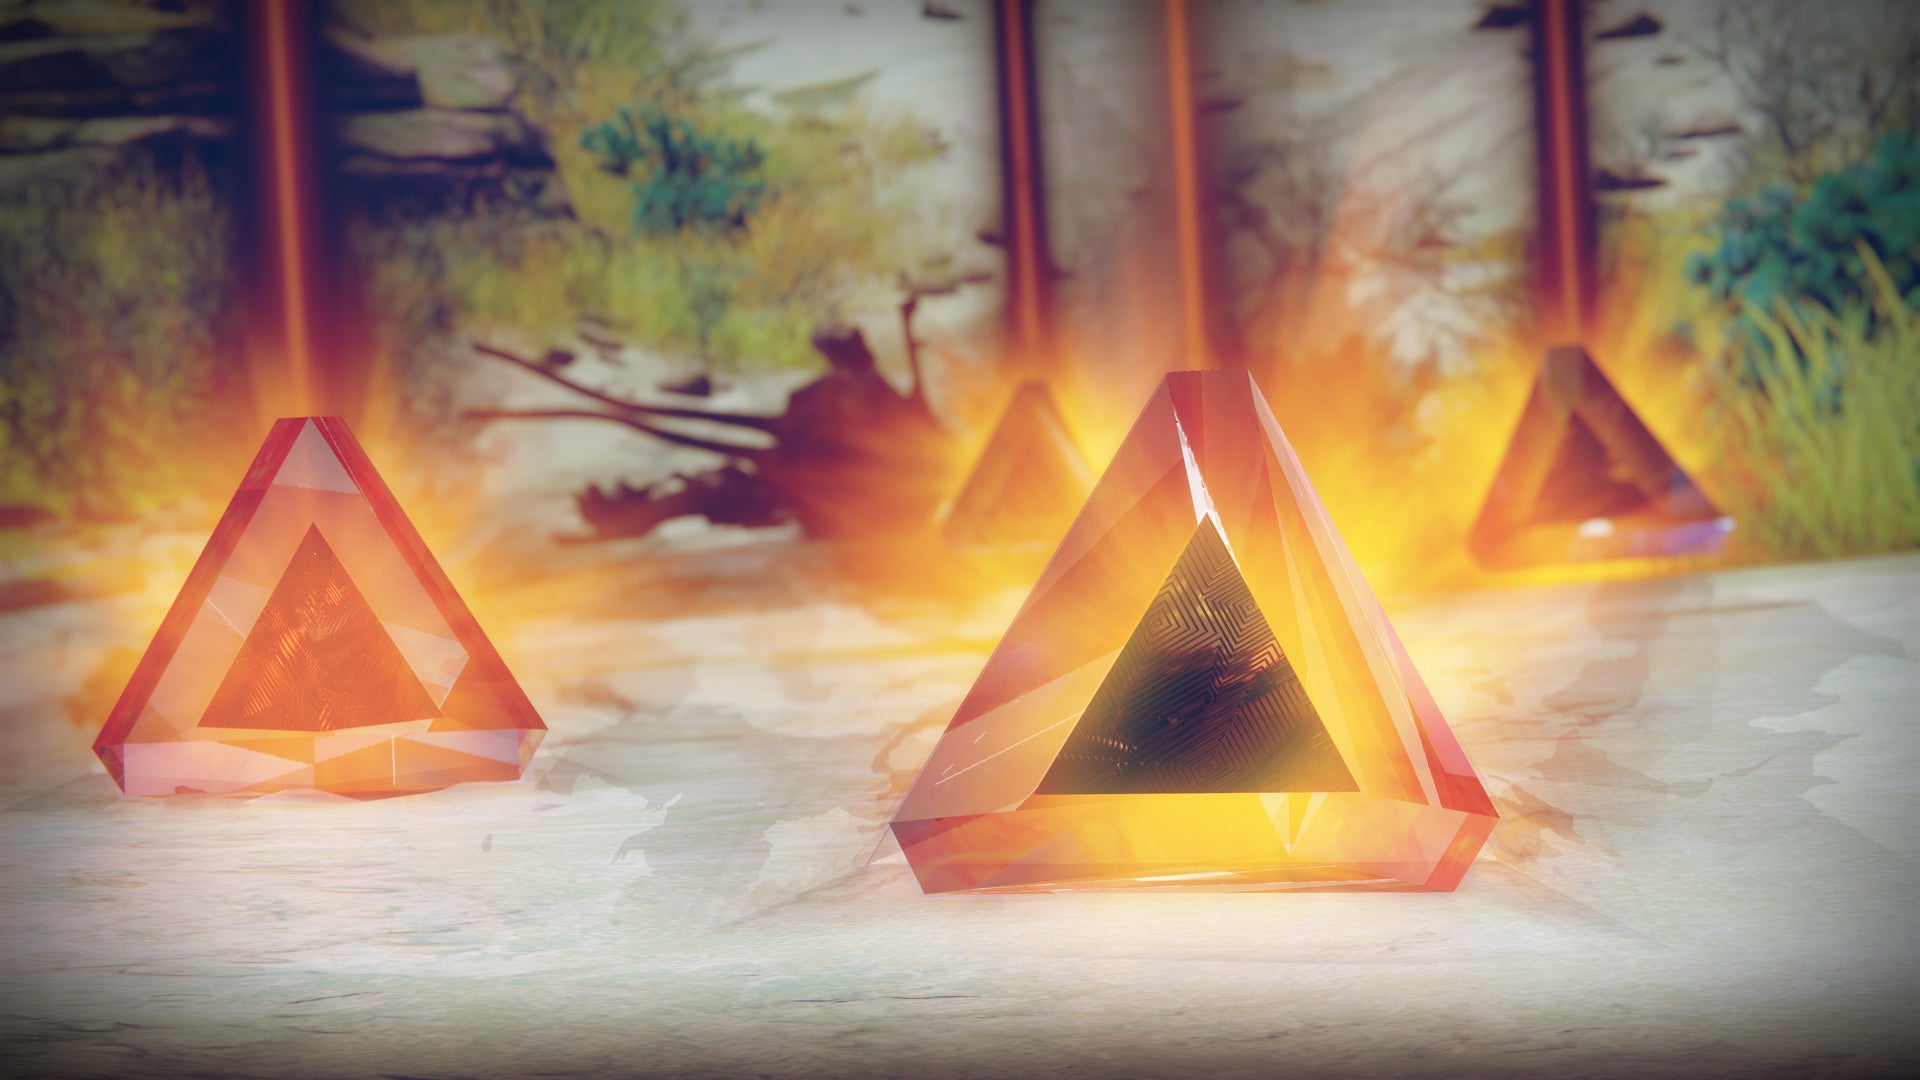 Image for Destiny 2: Season of Arrivals - How to unlock Contact Public Events, earn Umbral Engrams and complete the Means to an End questline